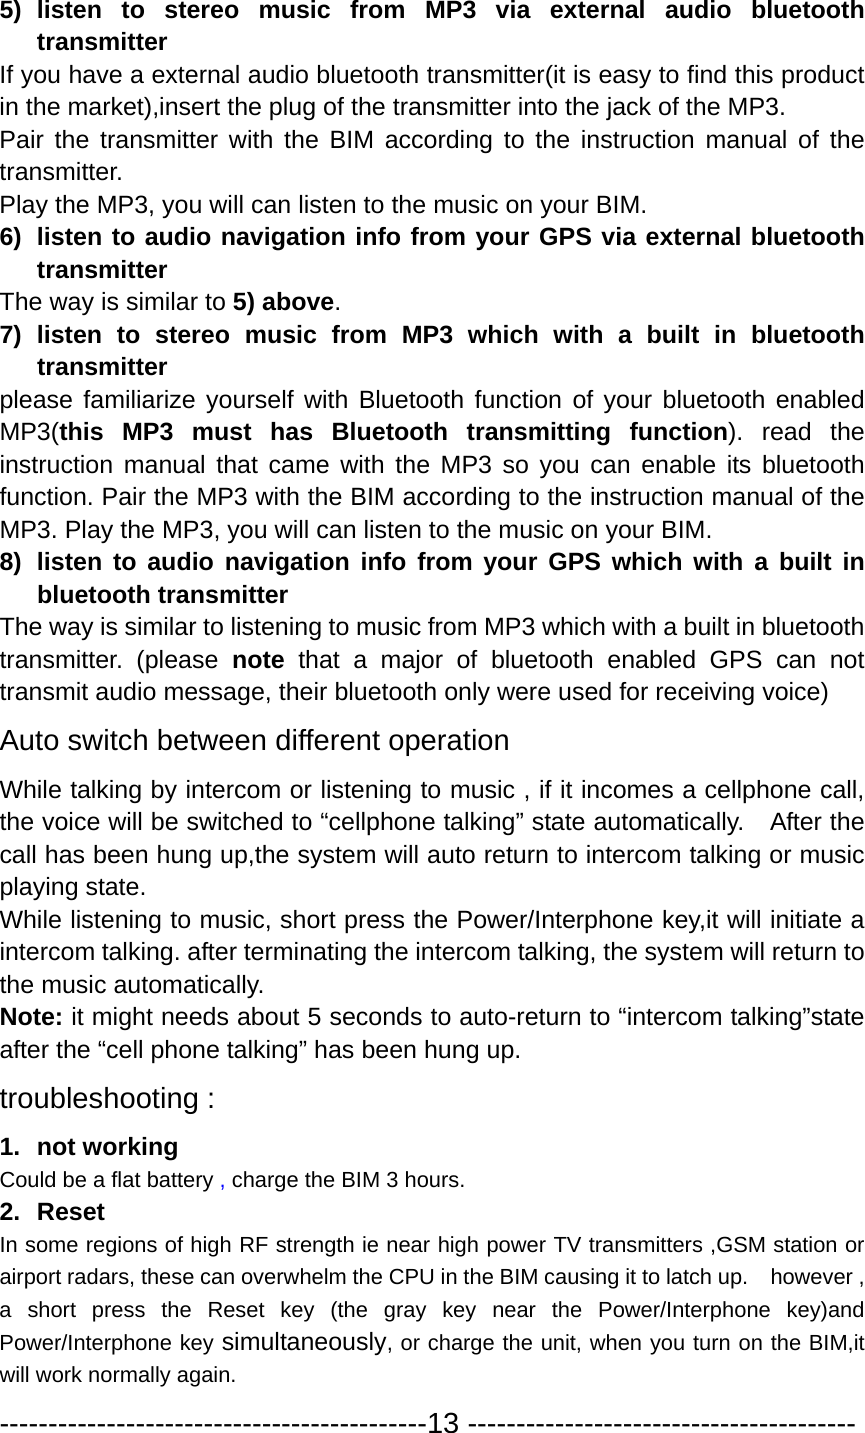 5) listen to stereo music from MP3 via external audio bluetooth transmitter  If you have a external audio bluetooth transmitter(it is easy to find this product in the market),insert the plug of the transmitter into the jack of the MP3. Pair the transmitter with the BIM according to the instruction manual of the transmitter.  Play the MP3, you will can listen to the music on your BIM. 6)  listen to audio navigation info from your GPS via external bluetooth transmitter The way is similar to 5) above.  7) listen to stereo music from MP3 which with a built in bluetooth transmitter  please familiarize yourself with Bluetooth function of your bluetooth enabled MP3(this MP3 must has Bluetooth transmitting function). read the instruction manual that came with the MP3 so you can enable its bluetooth function. Pair the MP3 with the BIM according to the instruction manual of the MP3. Play the MP3, you will can listen to the music on your BIM. 8)  listen to audio navigation info from your GPS which with a built in bluetooth transmitter   The way is similar to listening to music from MP3 which with a built in bluetooth transmitter. (please note that a major of bluetooth enabled GPS can not transmit audio message, their bluetooth only were used for receiving voice) Auto switch between different operation While talking by intercom or listening to music , if it incomes a cellphone call, the voice will be switched to “cellphone talking” state automatically.    After the call has been hung up,the system will auto return to intercom talking or music playing state. While listening to music, short press the Power/Interphone key,it will initiate a intercom talking. after terminating the intercom talking, the system will return to the music automatically. Note: it might needs about 5 seconds to auto-return to “intercom talking”state after the “cell phone talking” has been hung up. troubleshooting : 1. not working Could be a flat battery , charge the BIM 3 hours. 2. Reset In some regions of high RF strength ie near high power TV transmitters ,GSM station or airport radars, these can overwhelm the CPU in the BIM causing it to latch up.    however , a short press the Reset key (the gray key near the Power/Interphone key)and Power/Interphone key simultaneously, or charge the unit, when you turn on the BIM,it will work normally again. --------------------------------------------13 ---------------------------------------- 